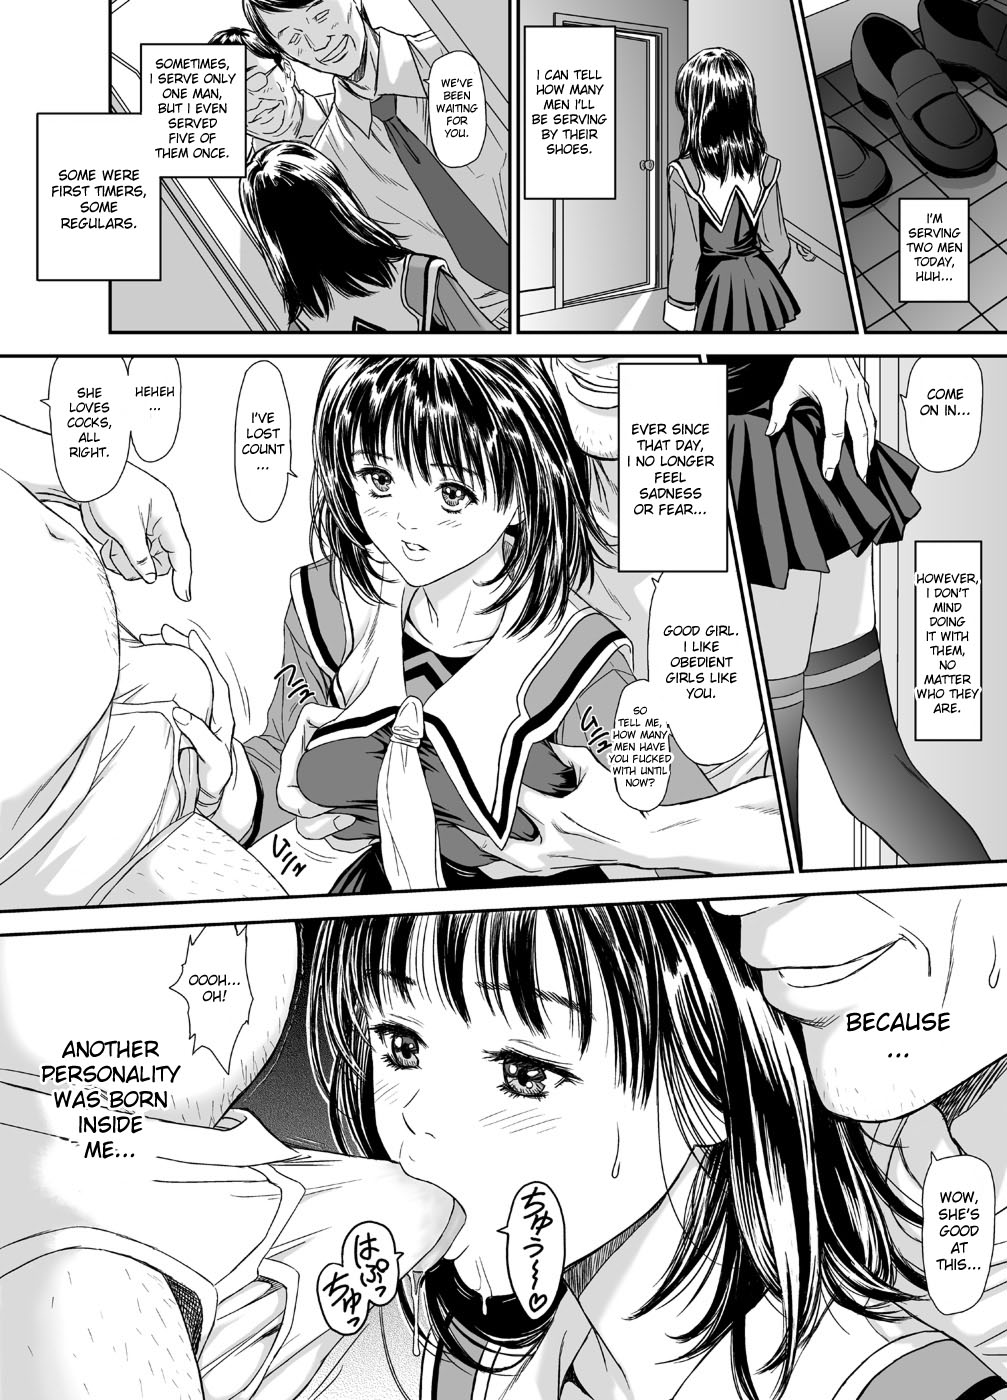 [Redlight] Iori - The Dark Side Of That Girl (Is) [English] page 18 full